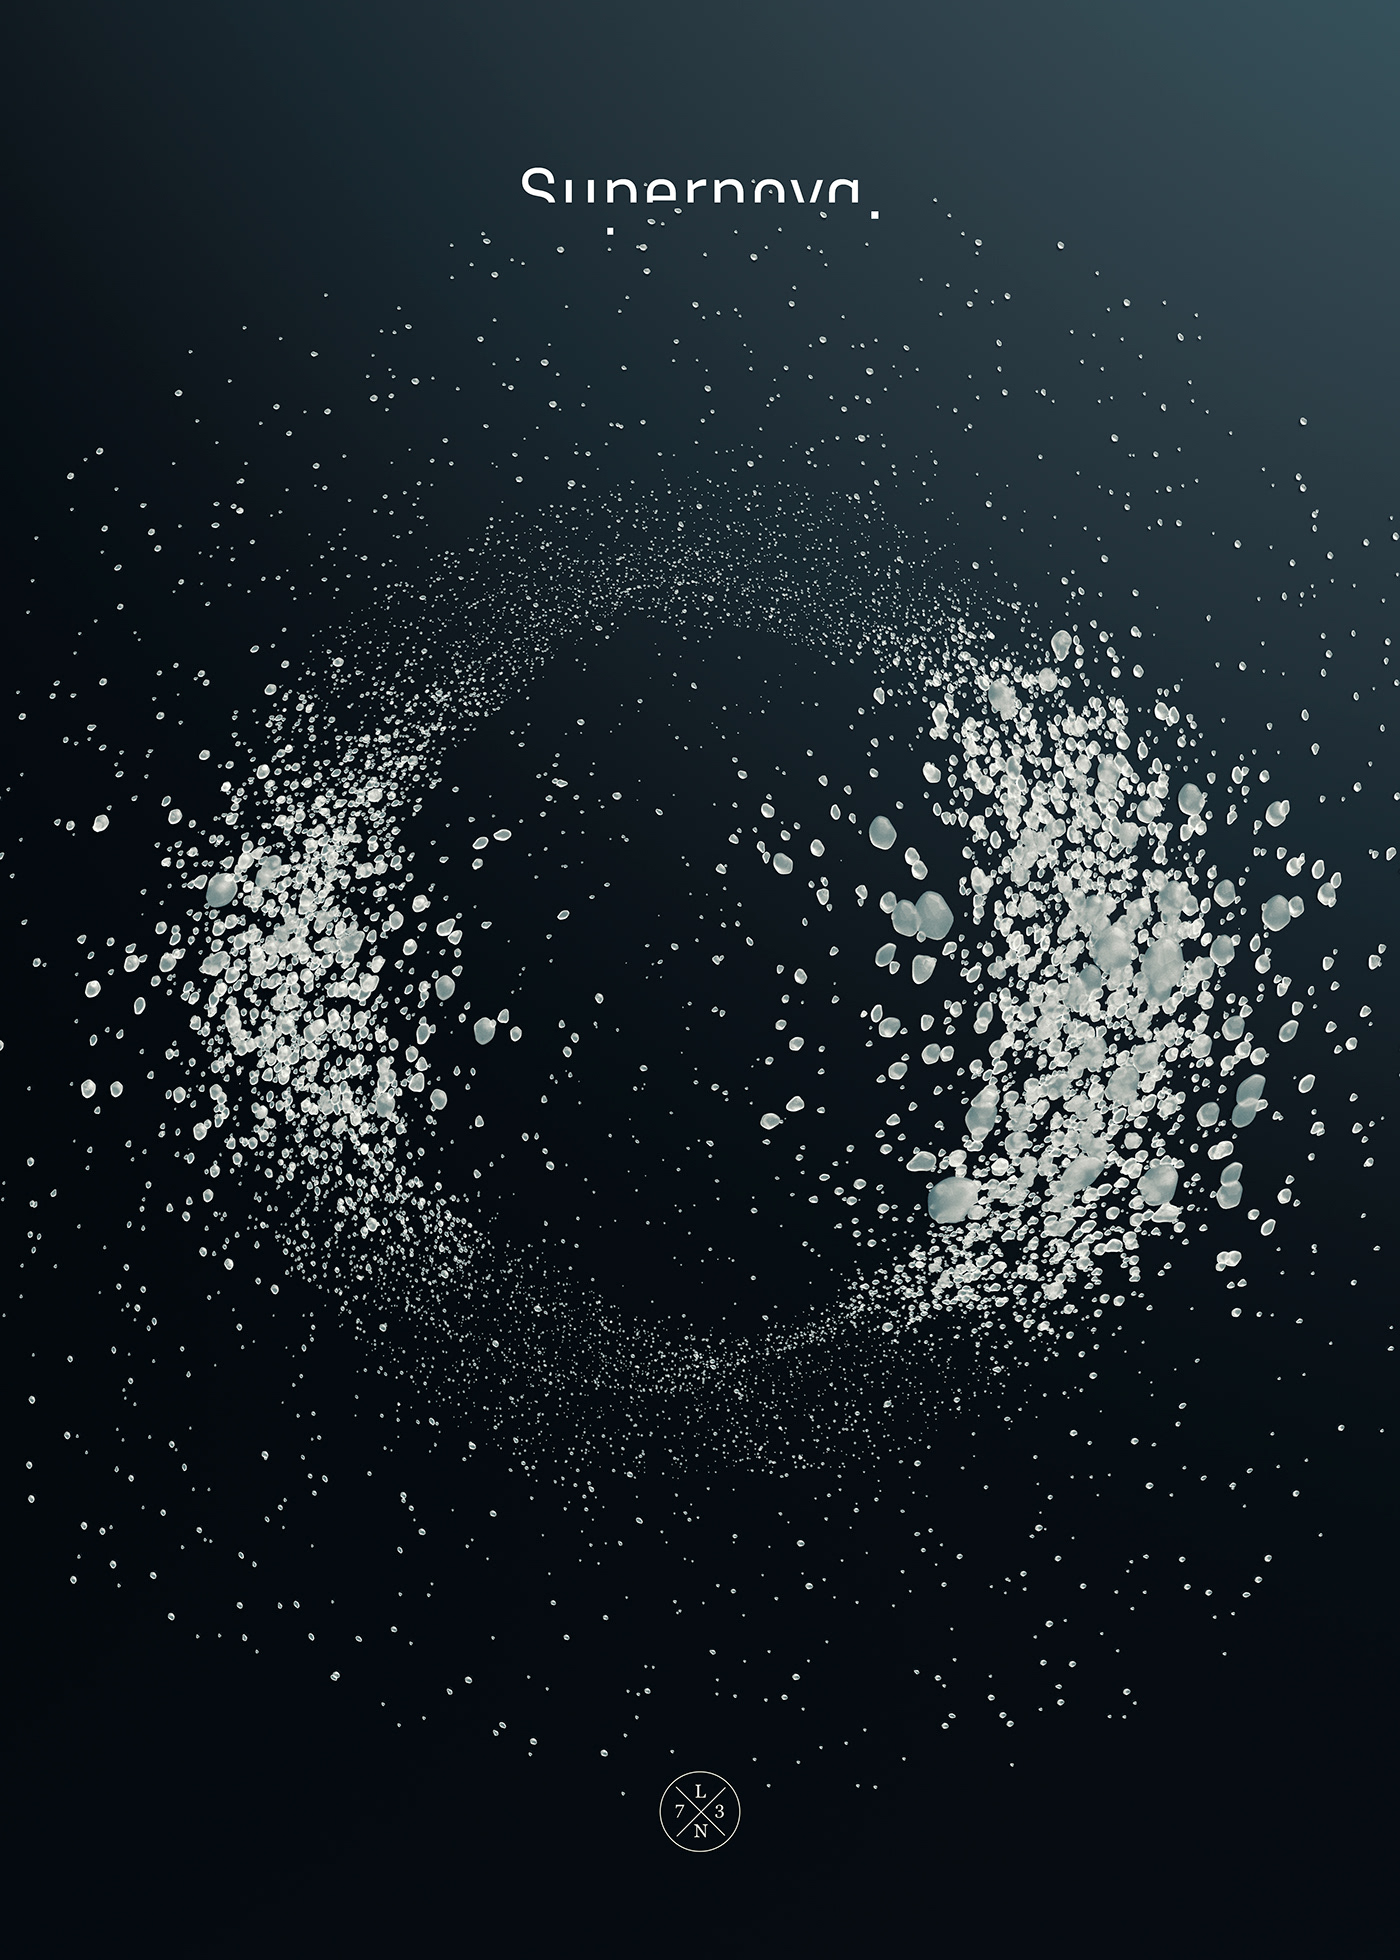 cinema 4d corona renderer Cycles 4D for fun Octane Render personnal work xparticles